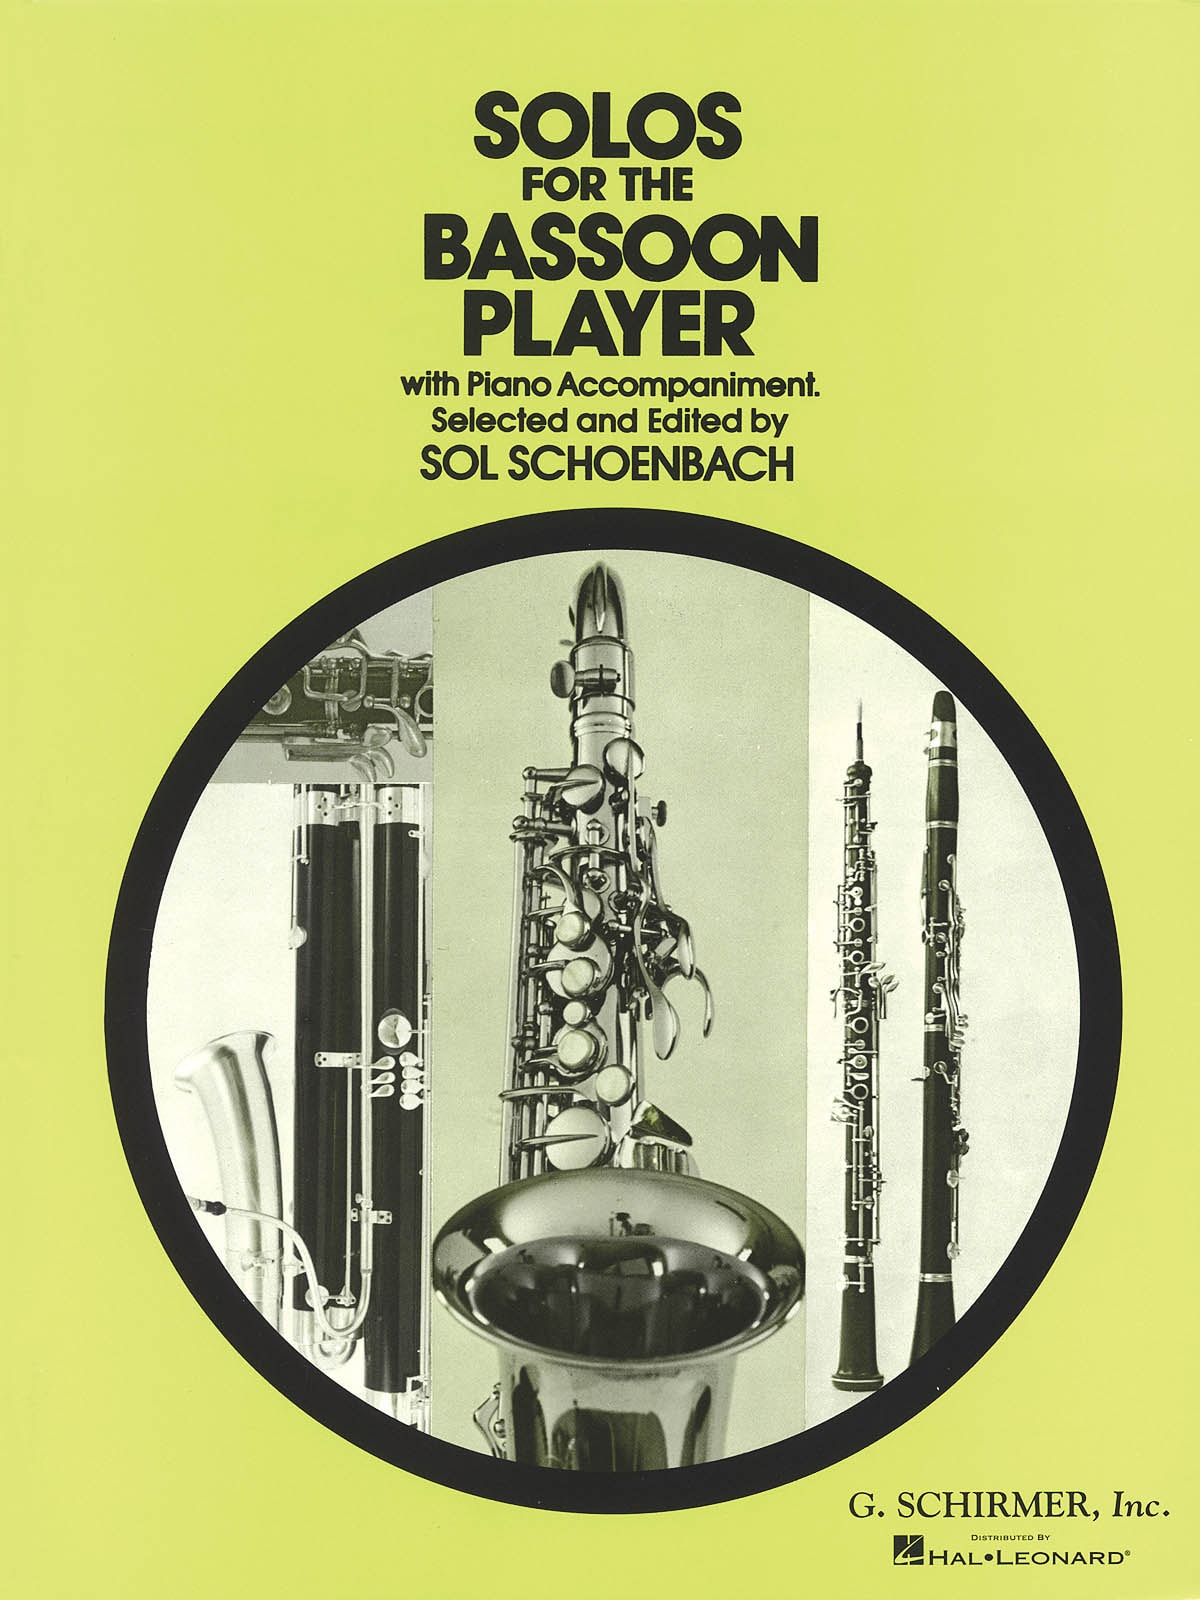 Solos for the Bassoon Player published by Schirmer